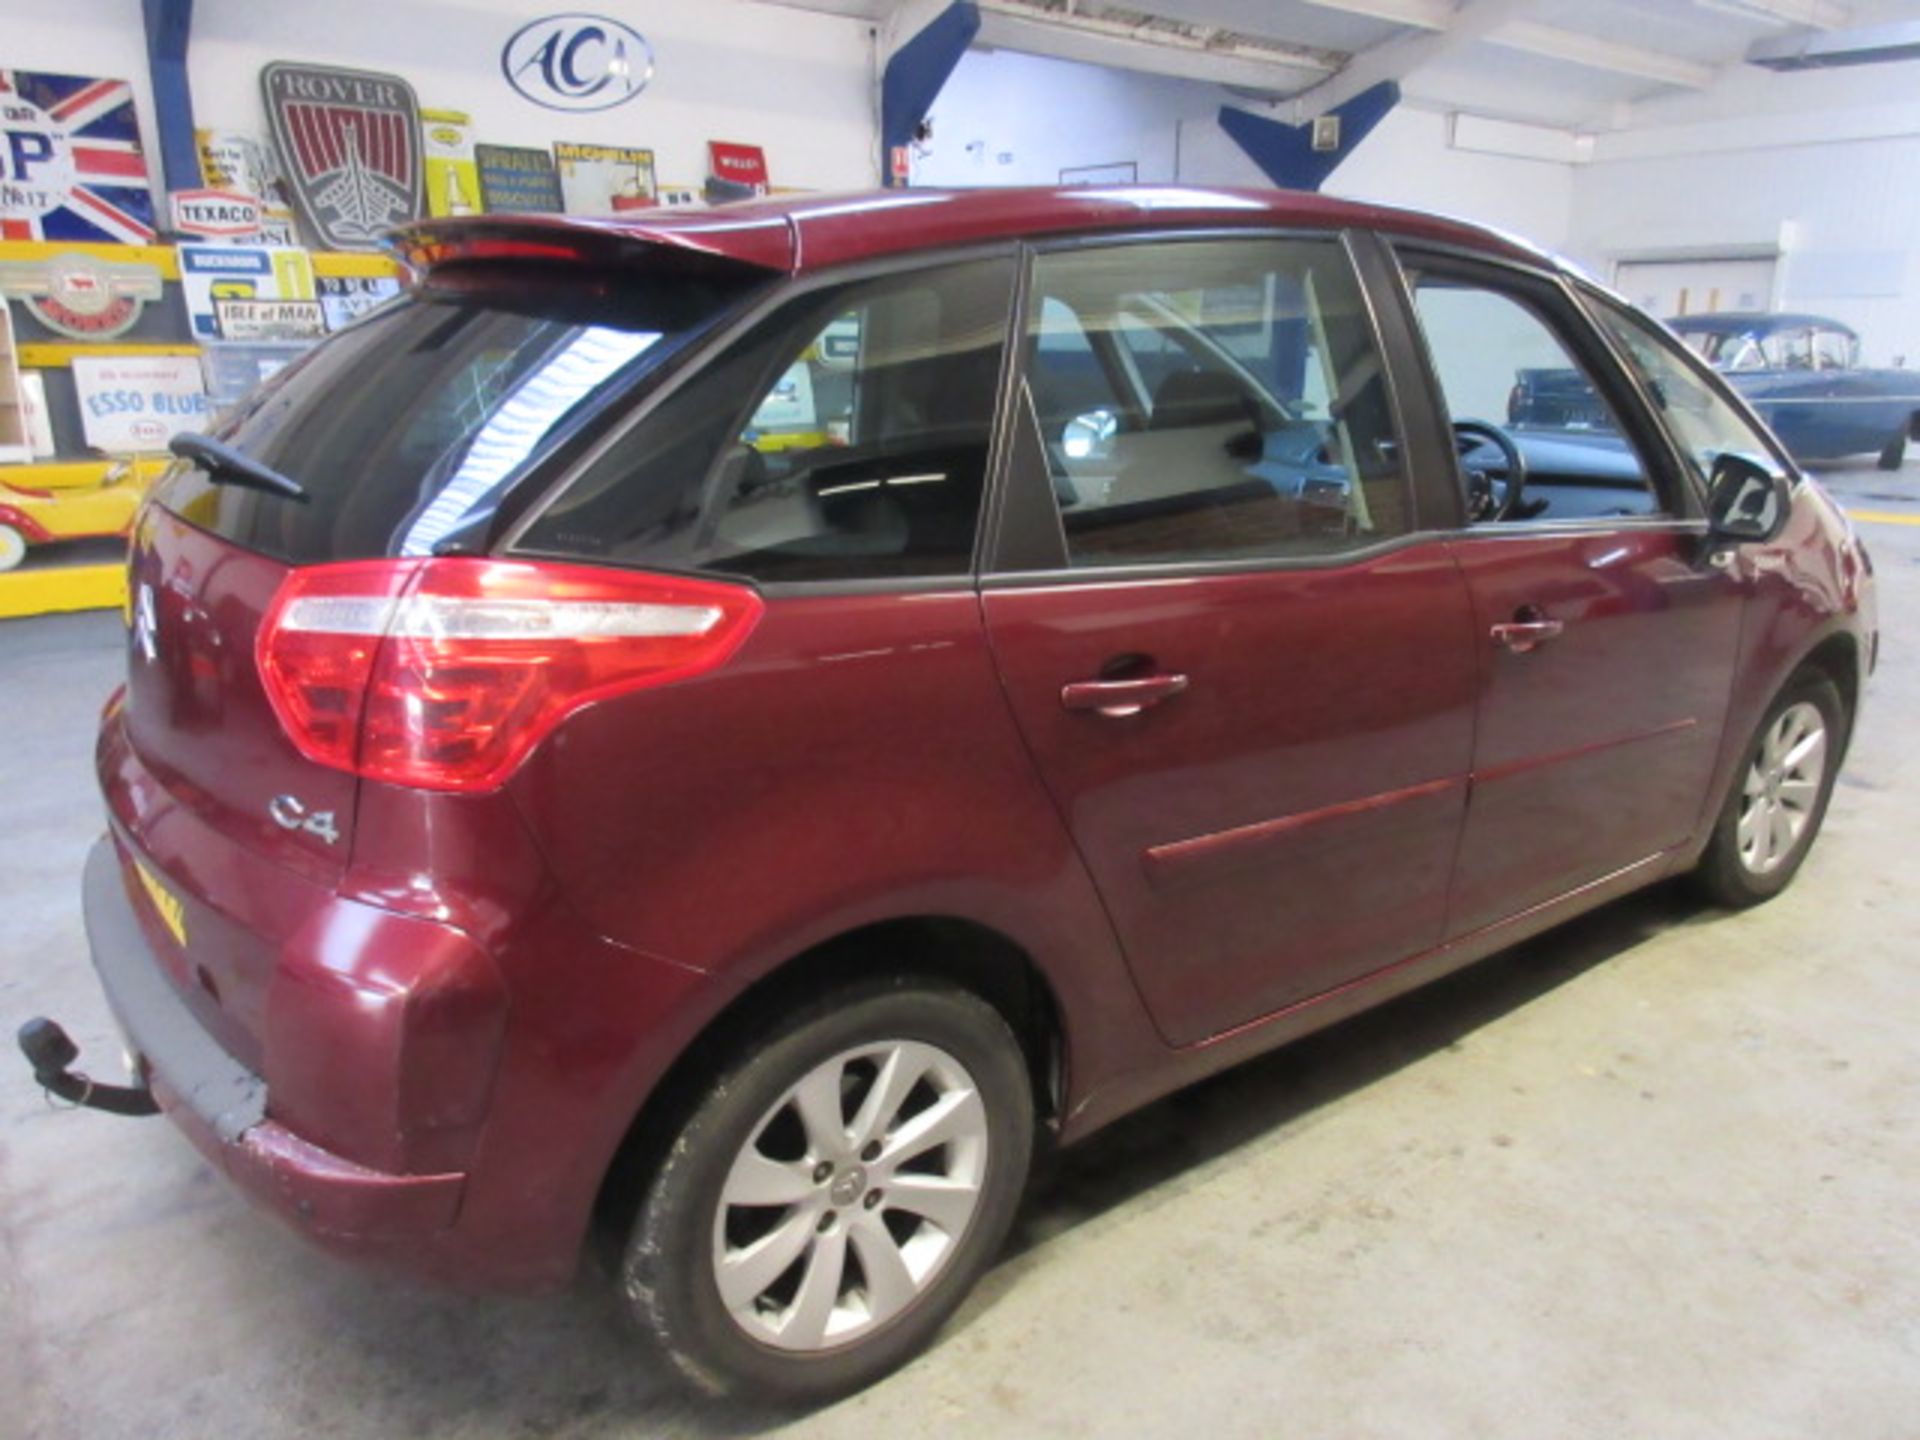 57 08 Citroen C4 Picasso VTR + HDI - Image 12 of 24